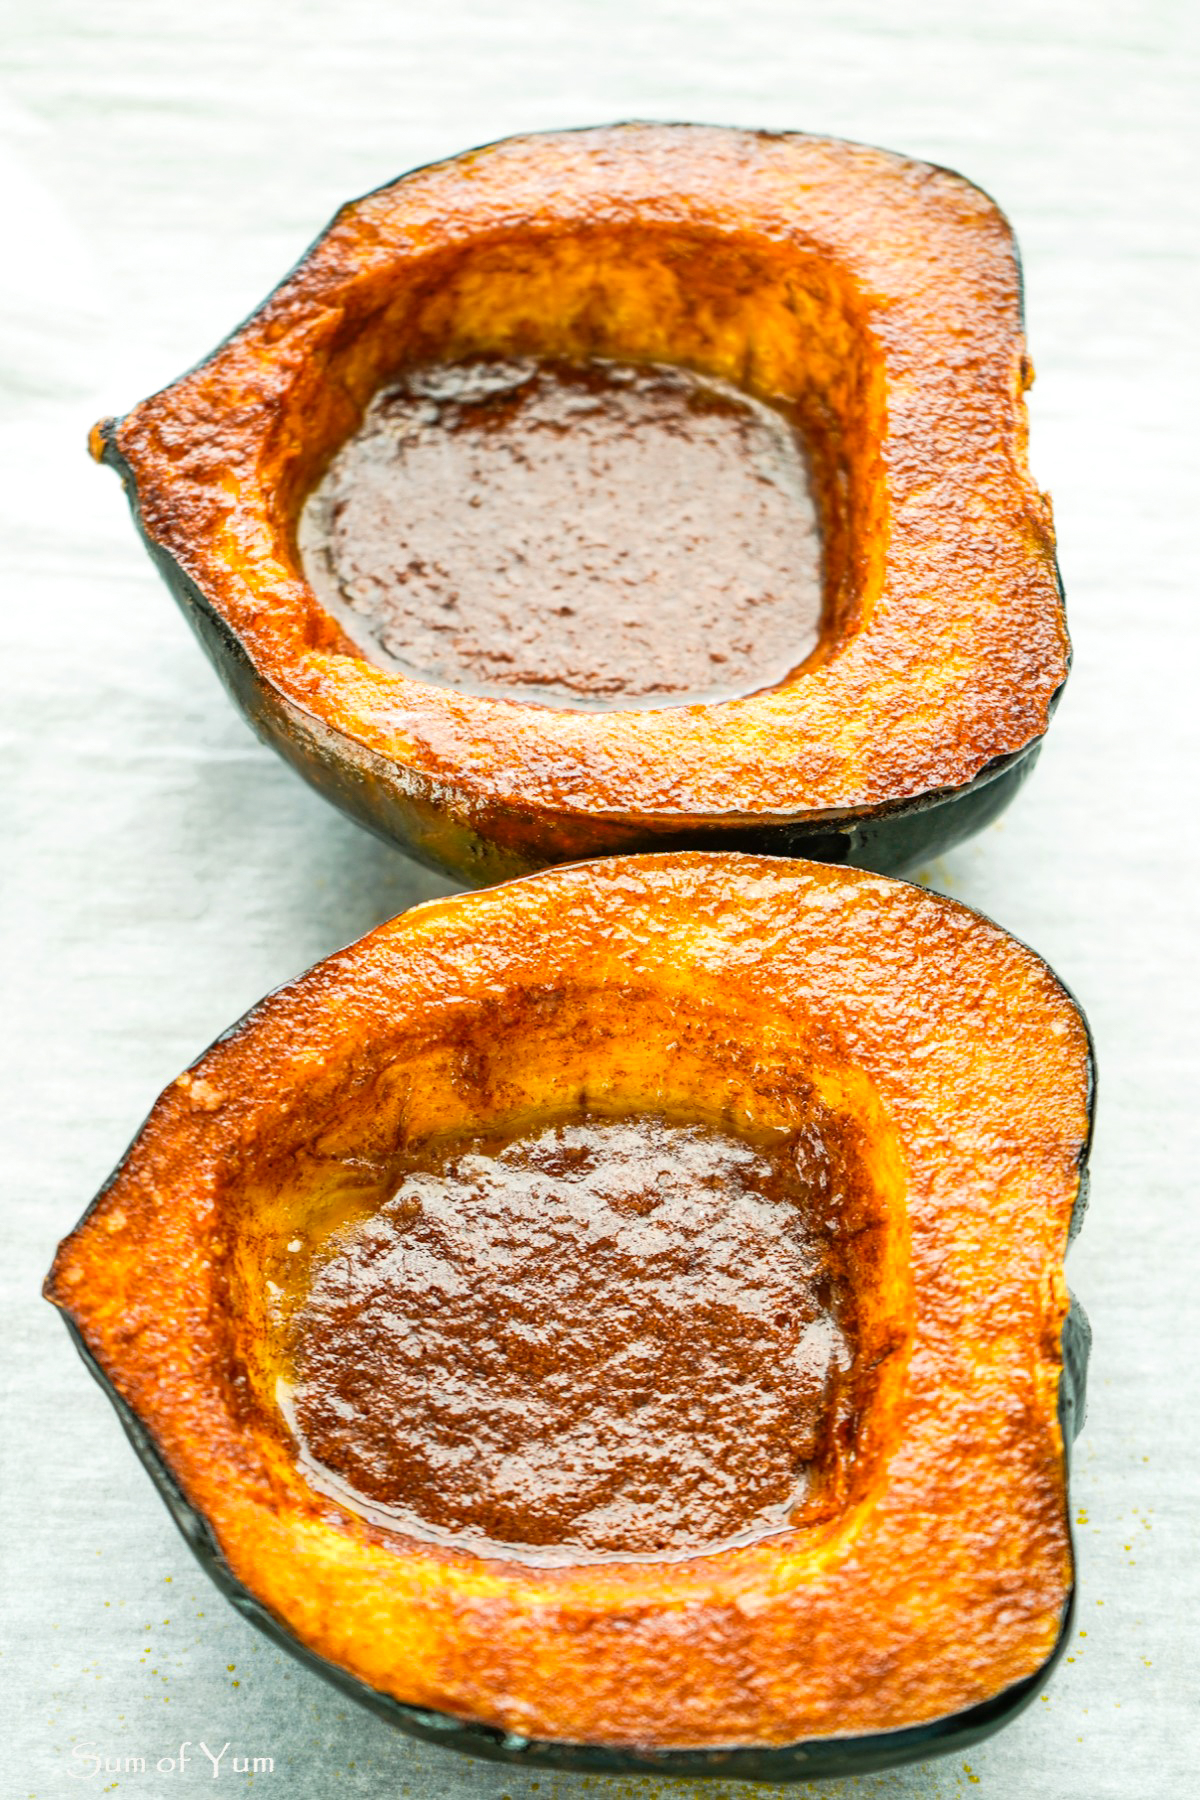 Baked Acorn Squash with Cinnamon Brown Sugar Butter - Sum of Yum